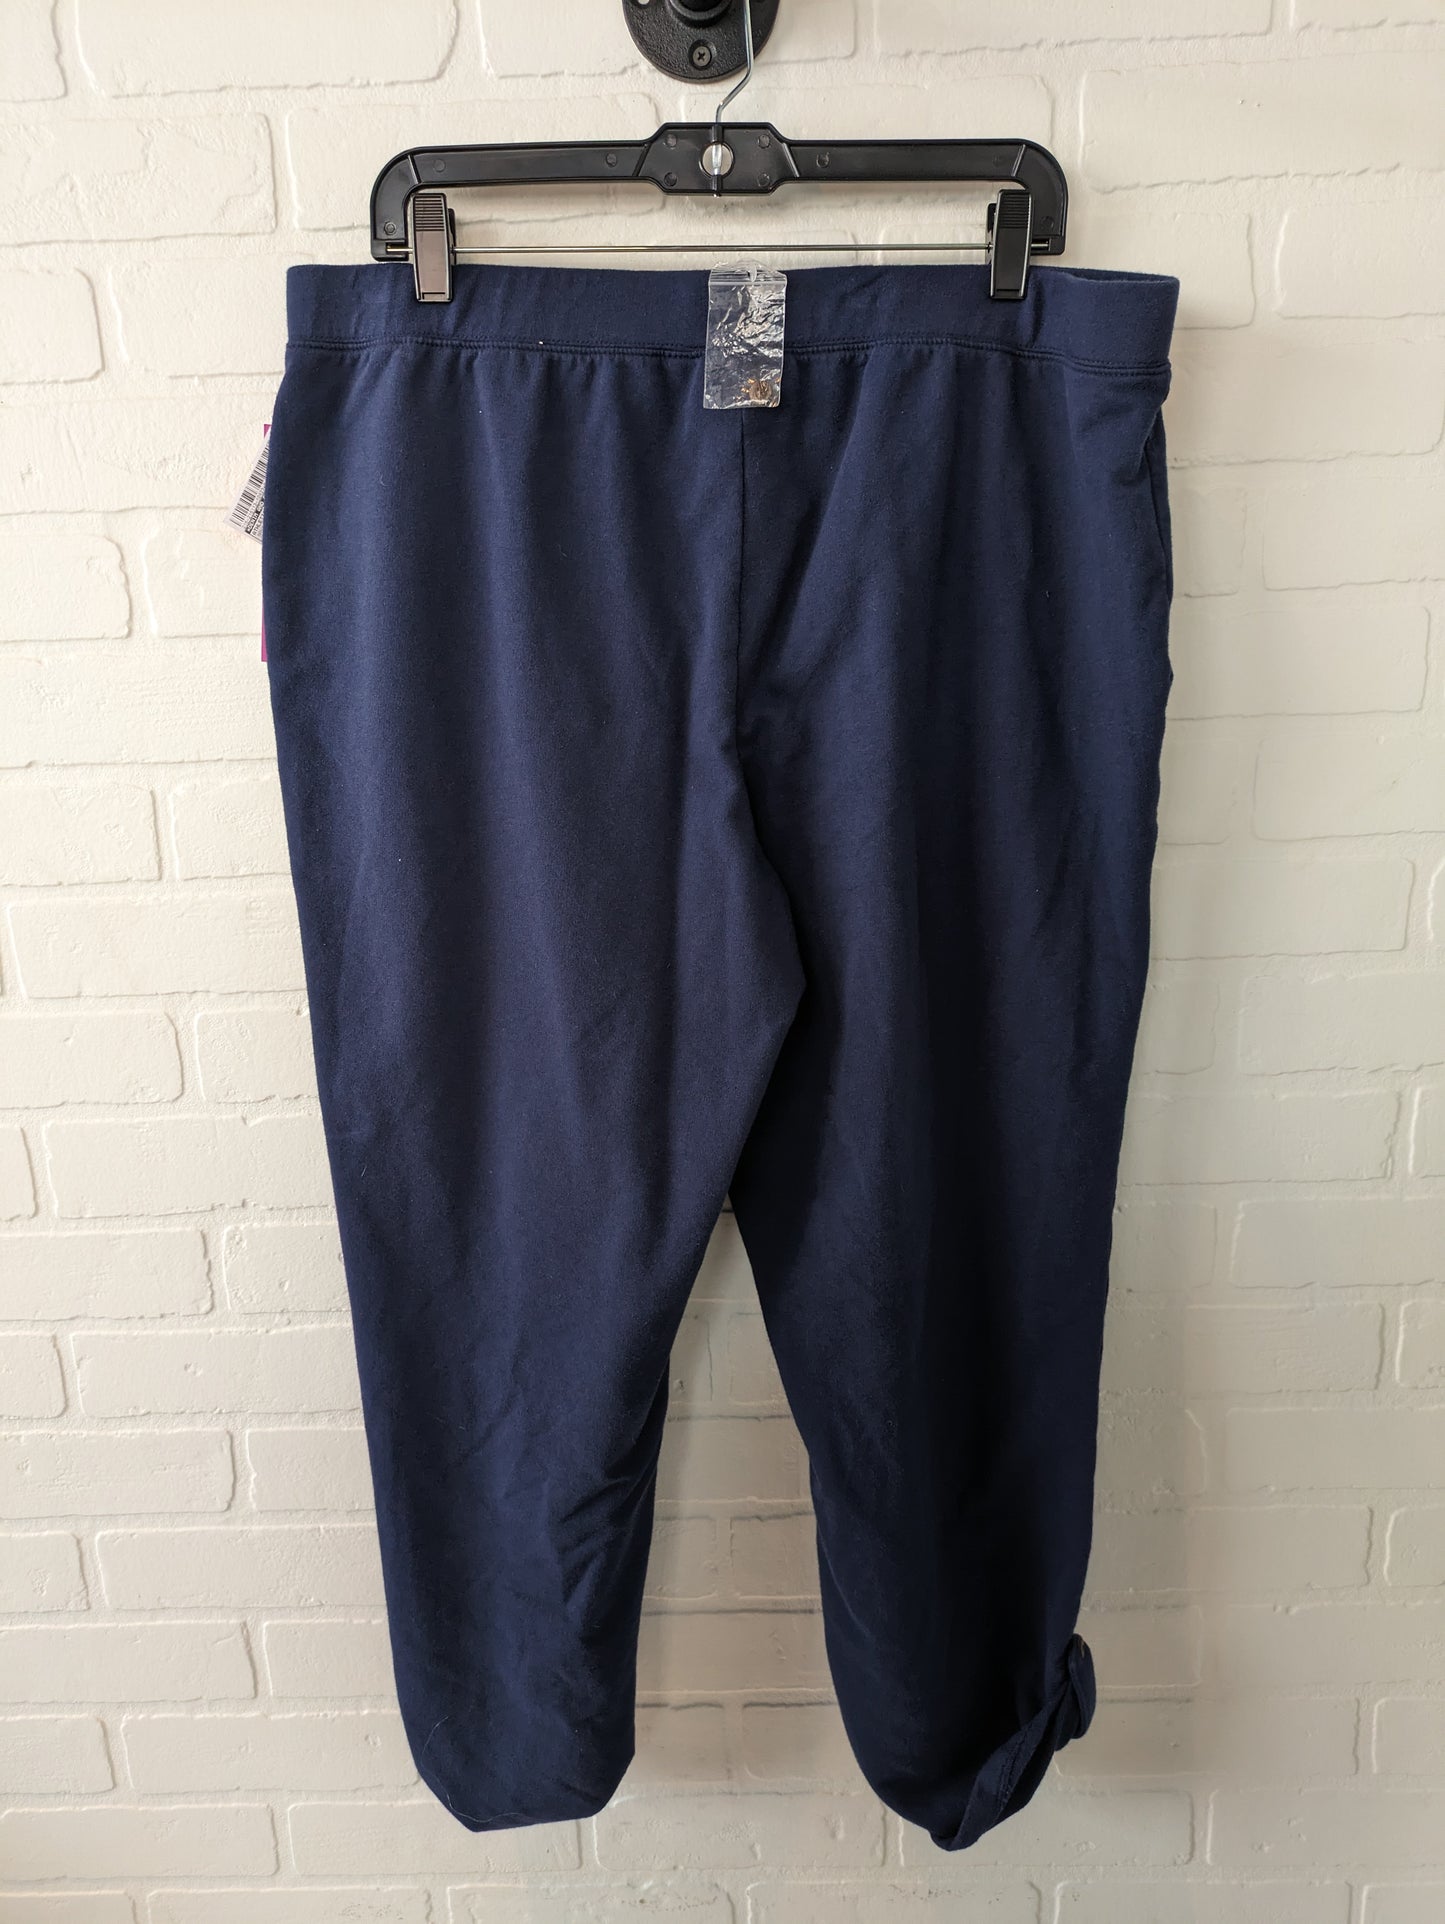 Athletic Capris By Denim And Co Qvc  Size: 14